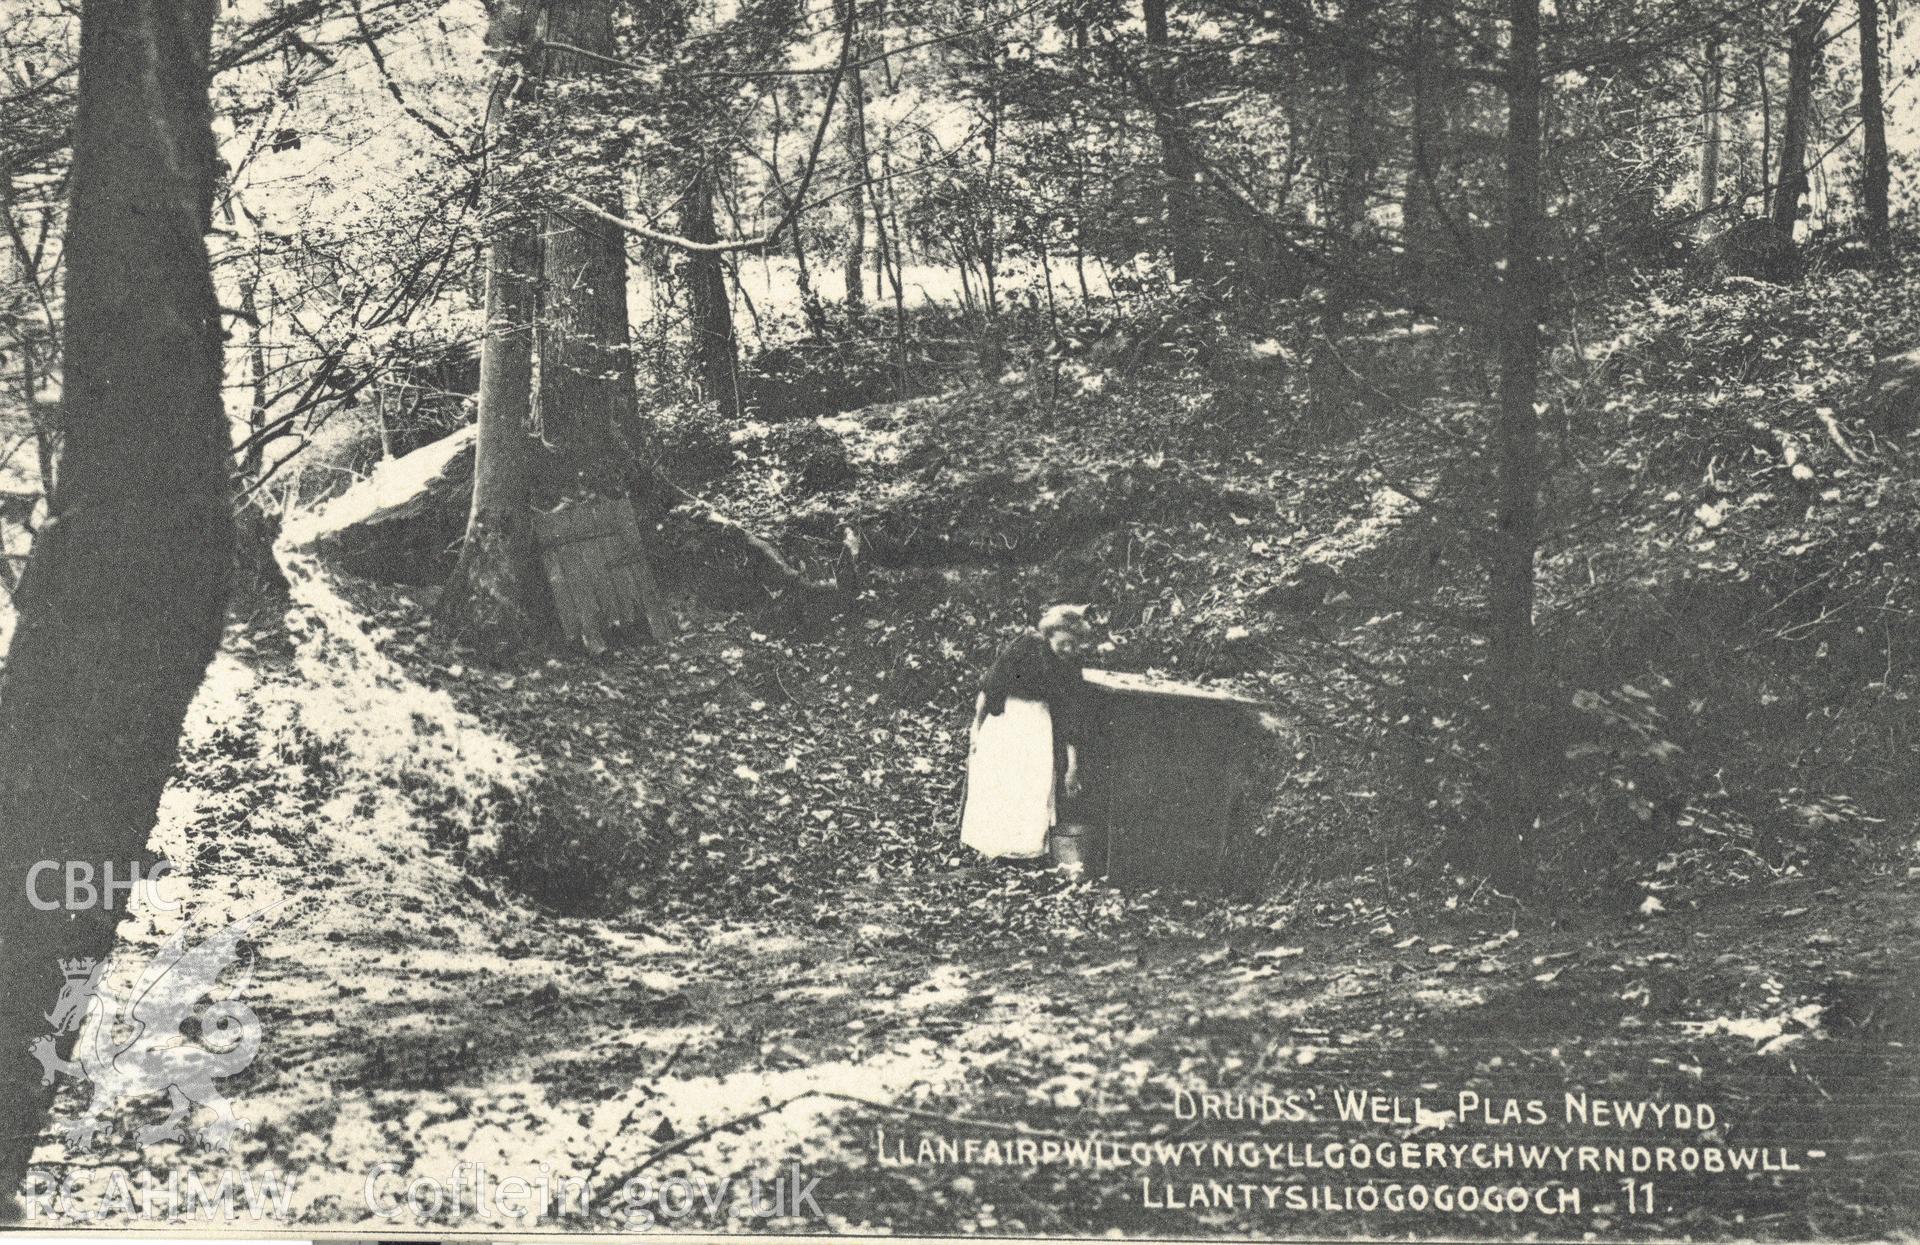 Digitised postcard image of Plas Newydd grounds, Llanddaniel Fab, including Druids' Well and figure, E.E. Roberts' Series  LlanfairPG. Produced by Parks and Gardens Data Services, from an original item in the Peter Davis Collection at Parks and Gardens UK. We hold only web-resolution images of this collection, suitable for viewing on screen and for research purposes only. We do not hold the original images, or publication quality scans.